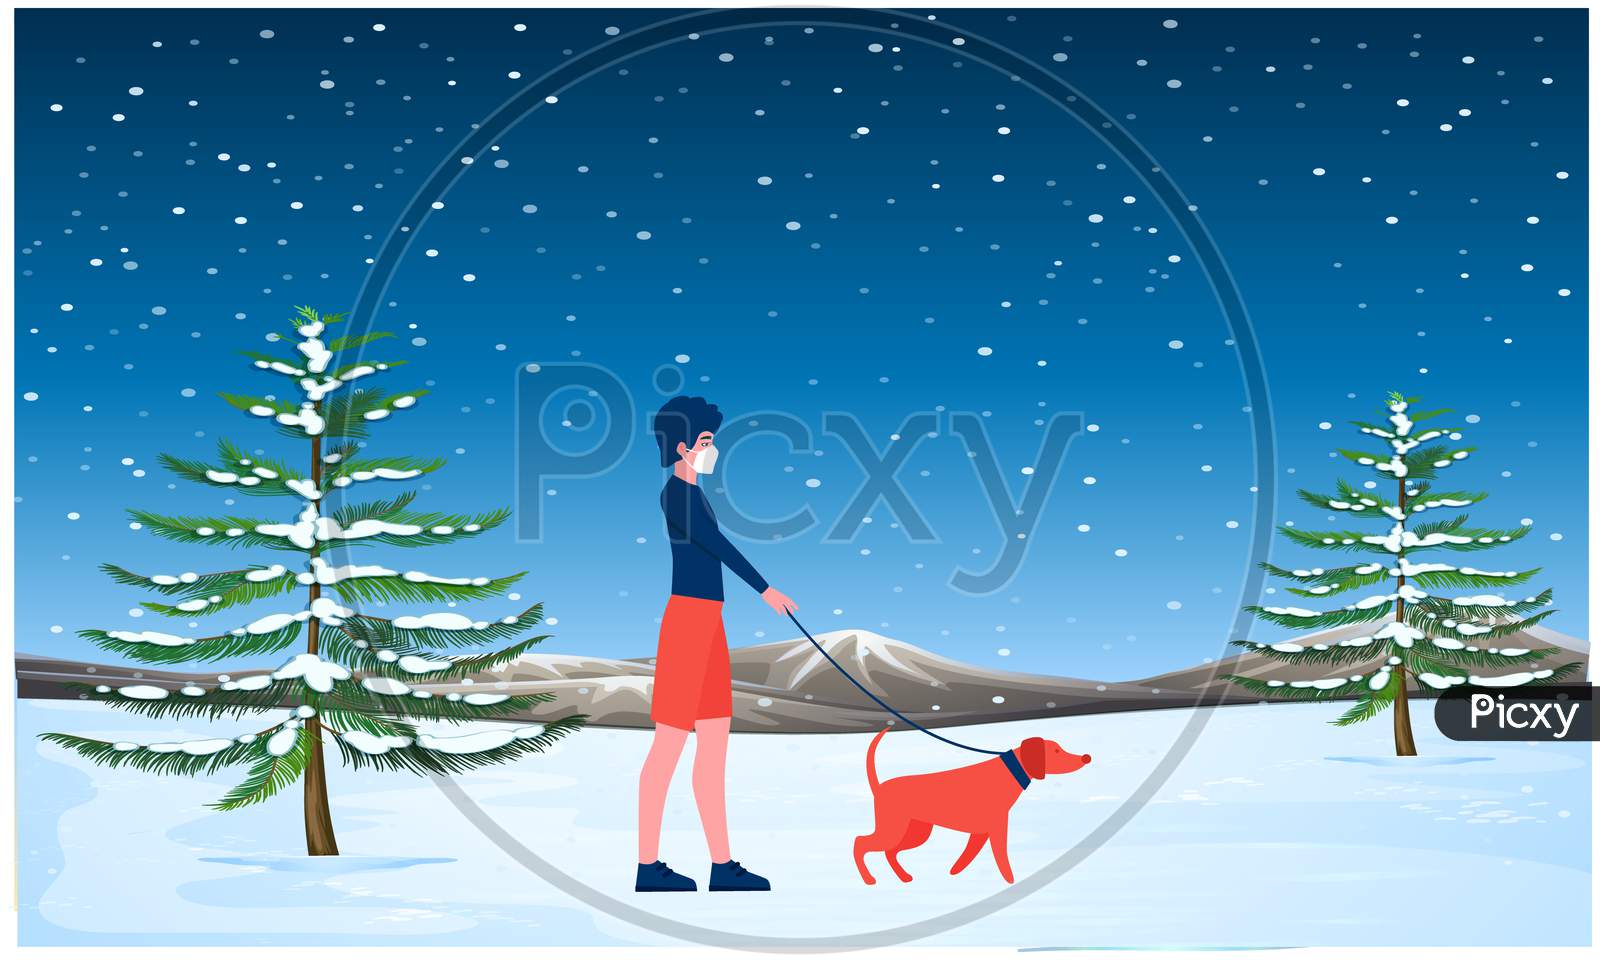 Girl Walking With Her Dog In A Snow